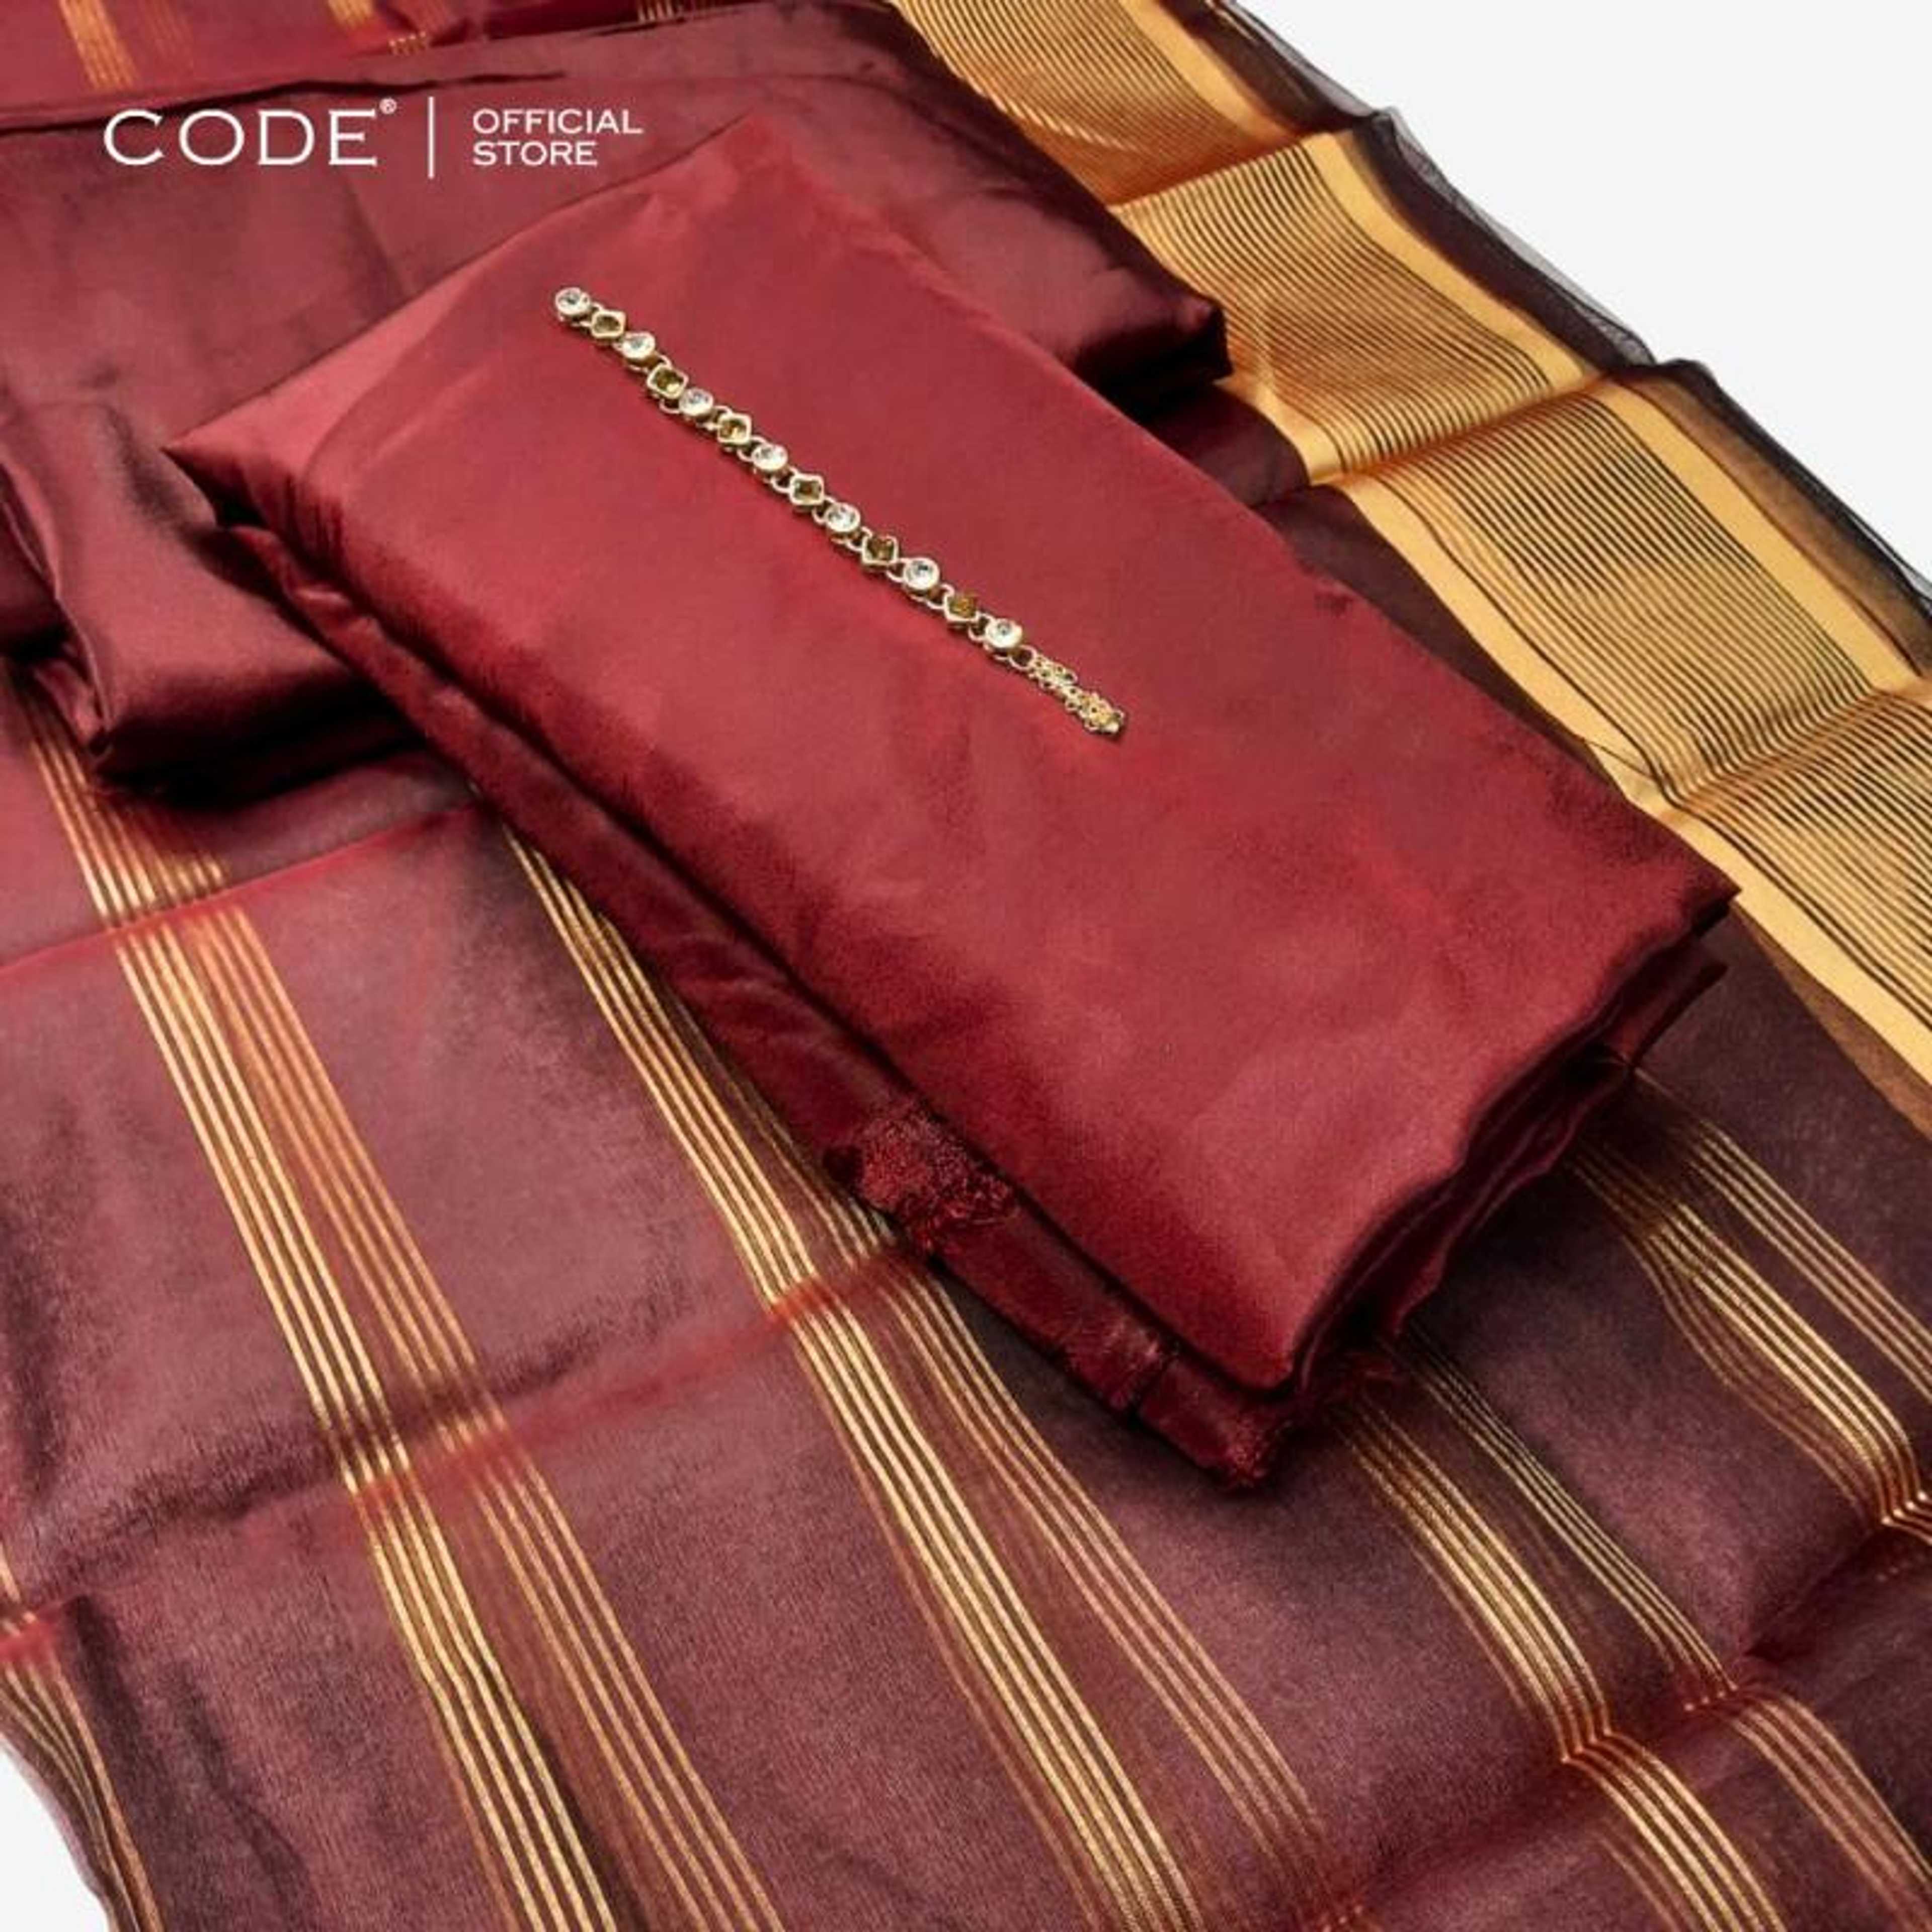 Code 3pc Unstitched Fabric For Women - 3 PC Unstitched Kataan Silk - High Quality Unstitched Fabric - Unstitched Suit -  New Design Unstitched Fabric For Women - Unstitched Suits For Women - Traditional Clothing - Maroon